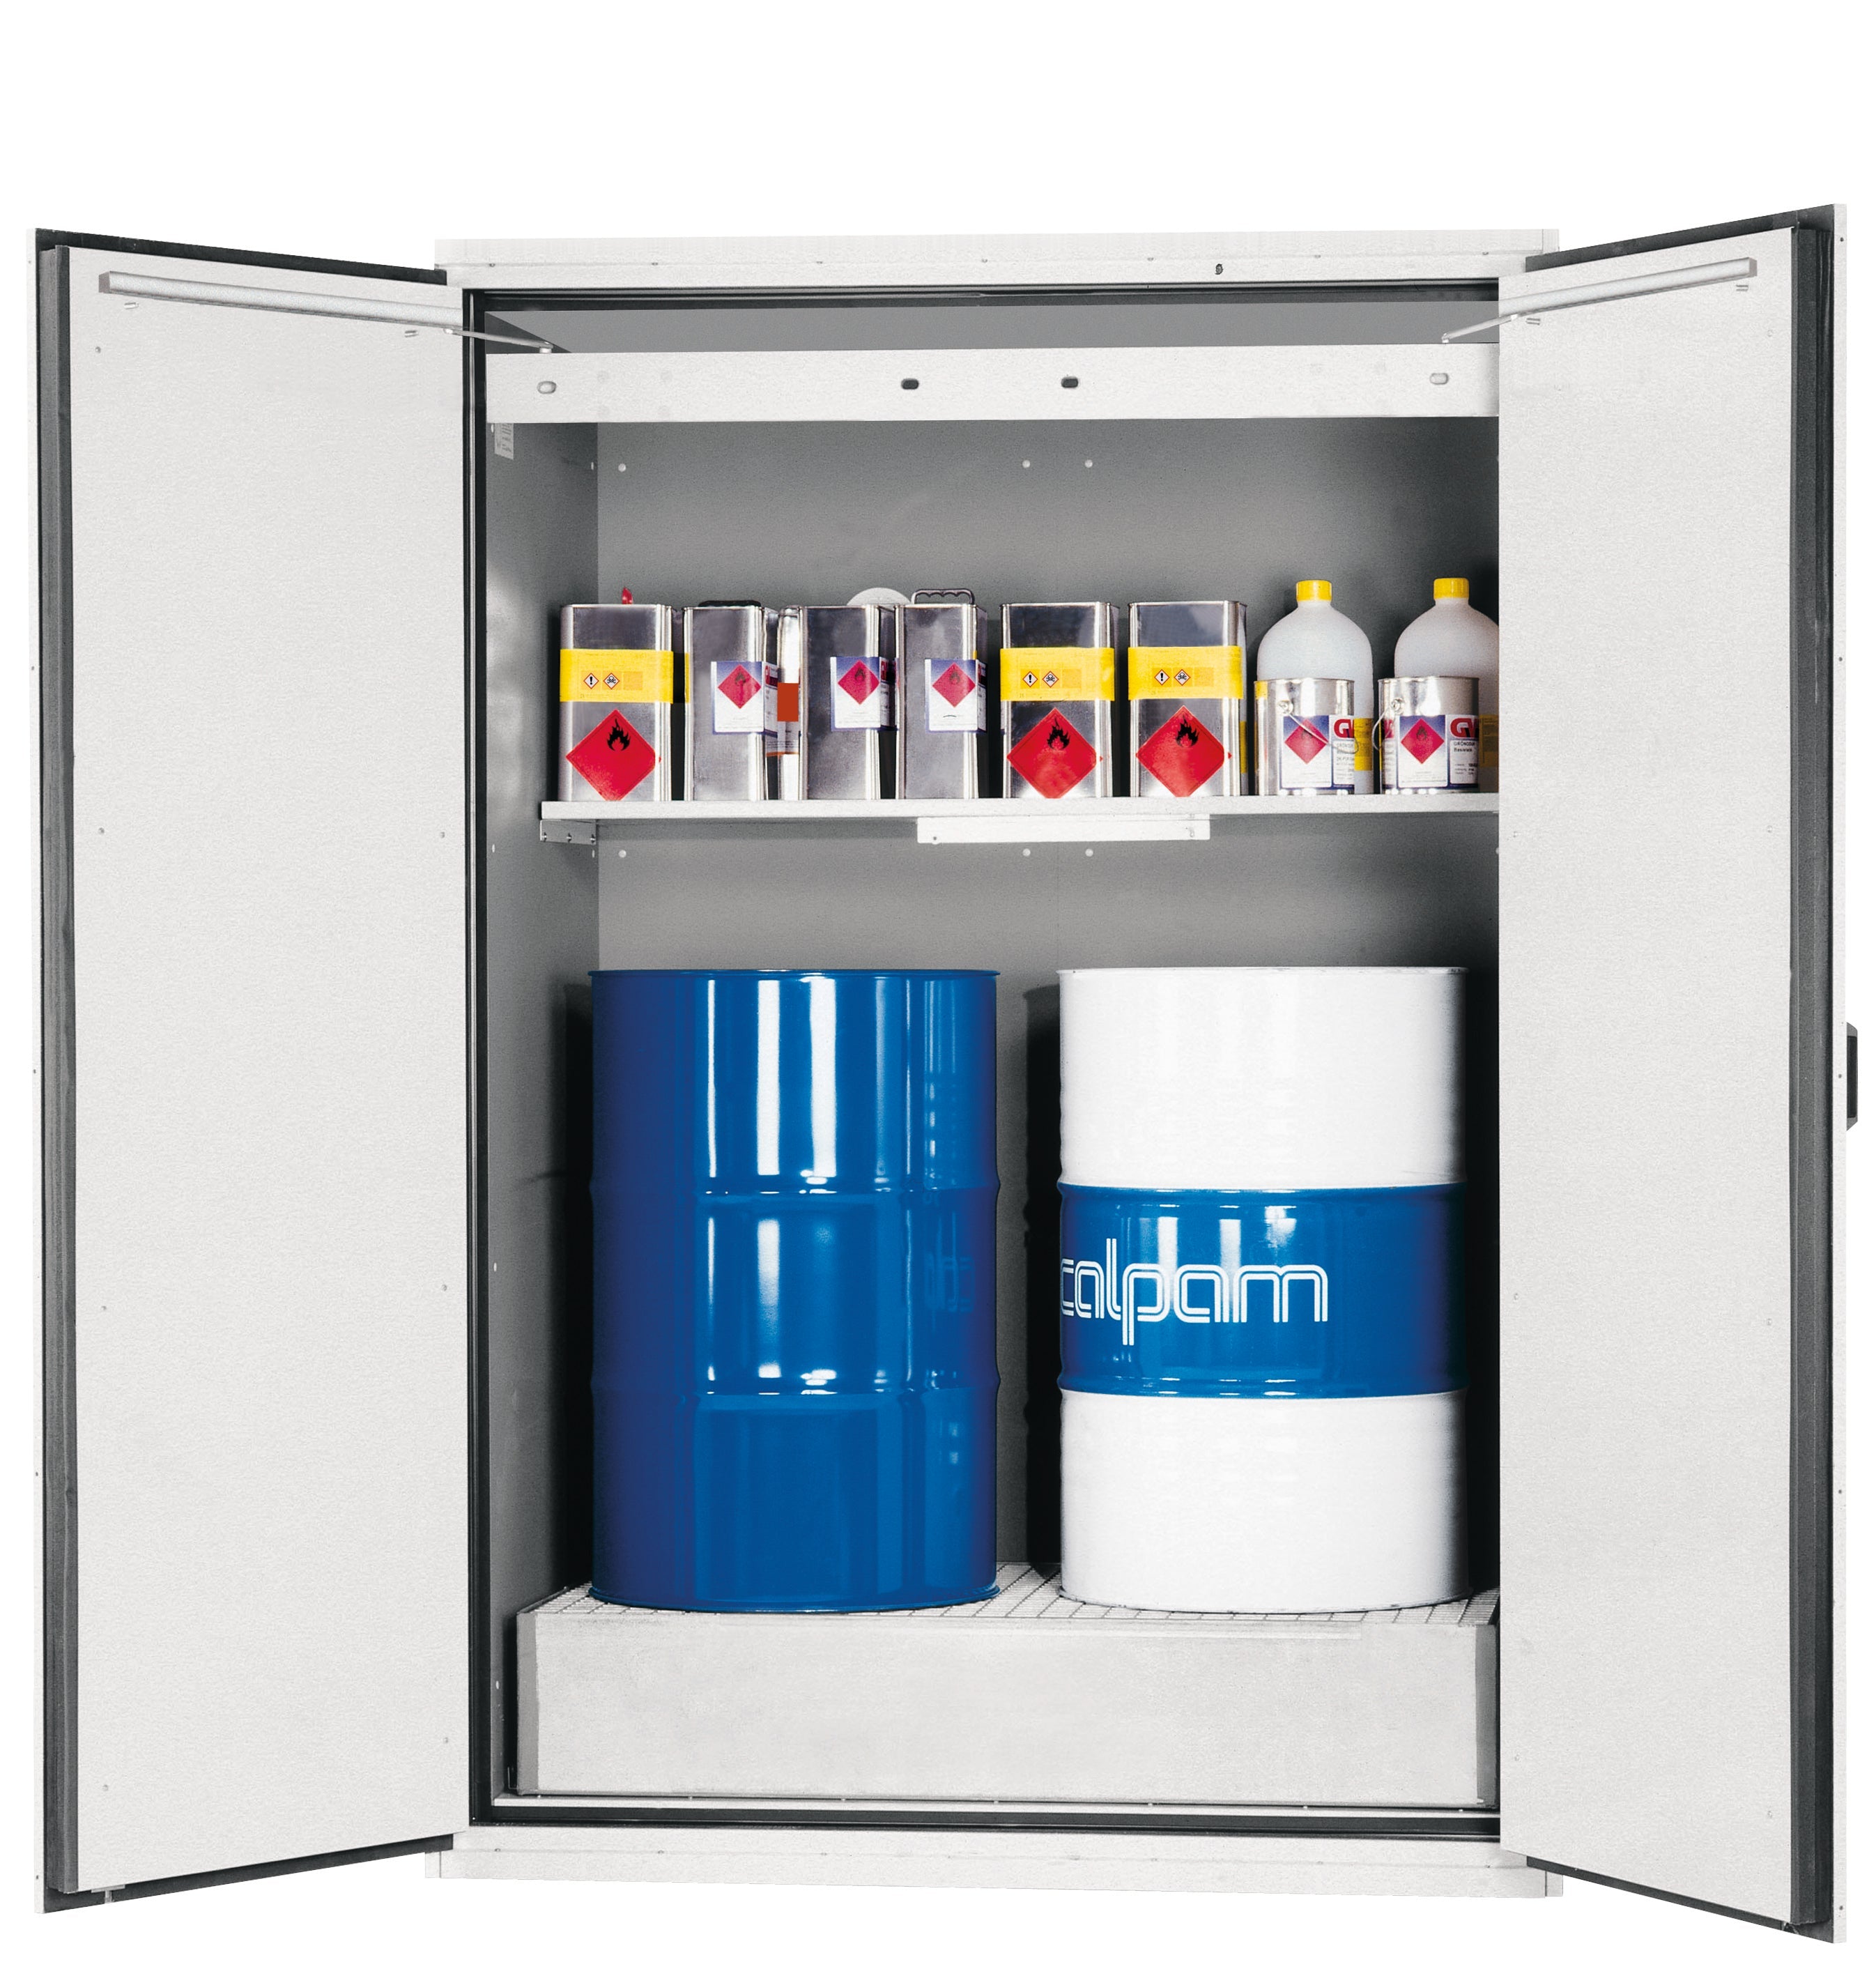 Type 90 safety cabinet XL-CLASSIC-90 model XL90.222.155.WDAS in light gray RAL 7035 with 1x standard shelf (sheet steel)